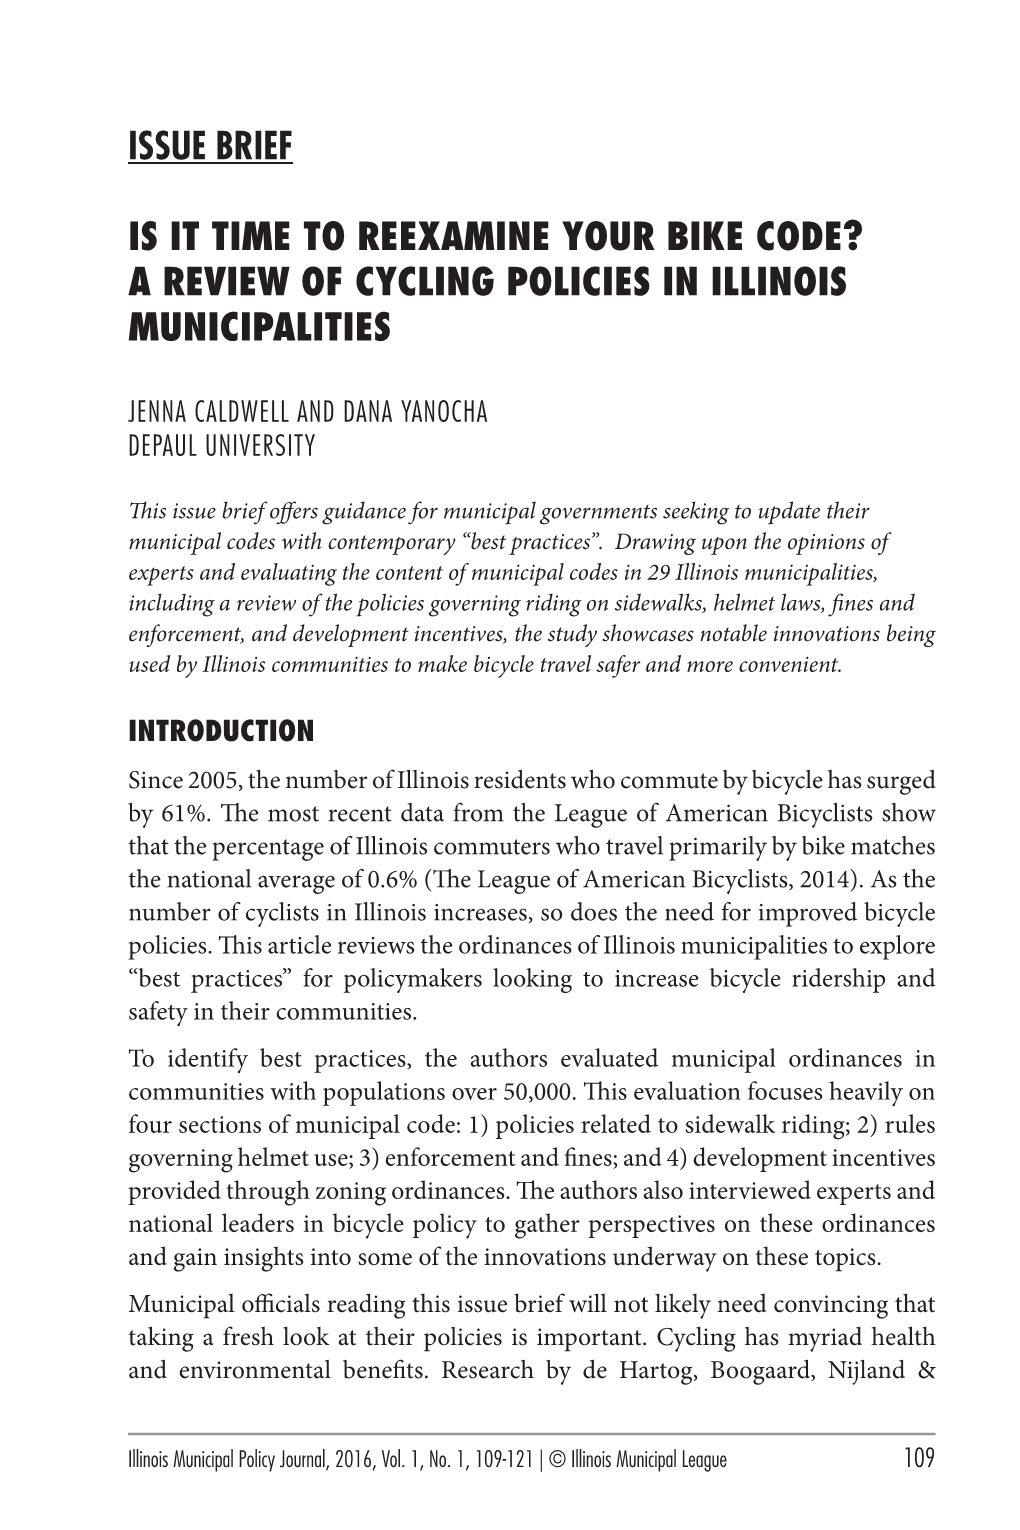 Issue Brief Is It Time to Reexamine Your Bike Code? a Review of Cycling